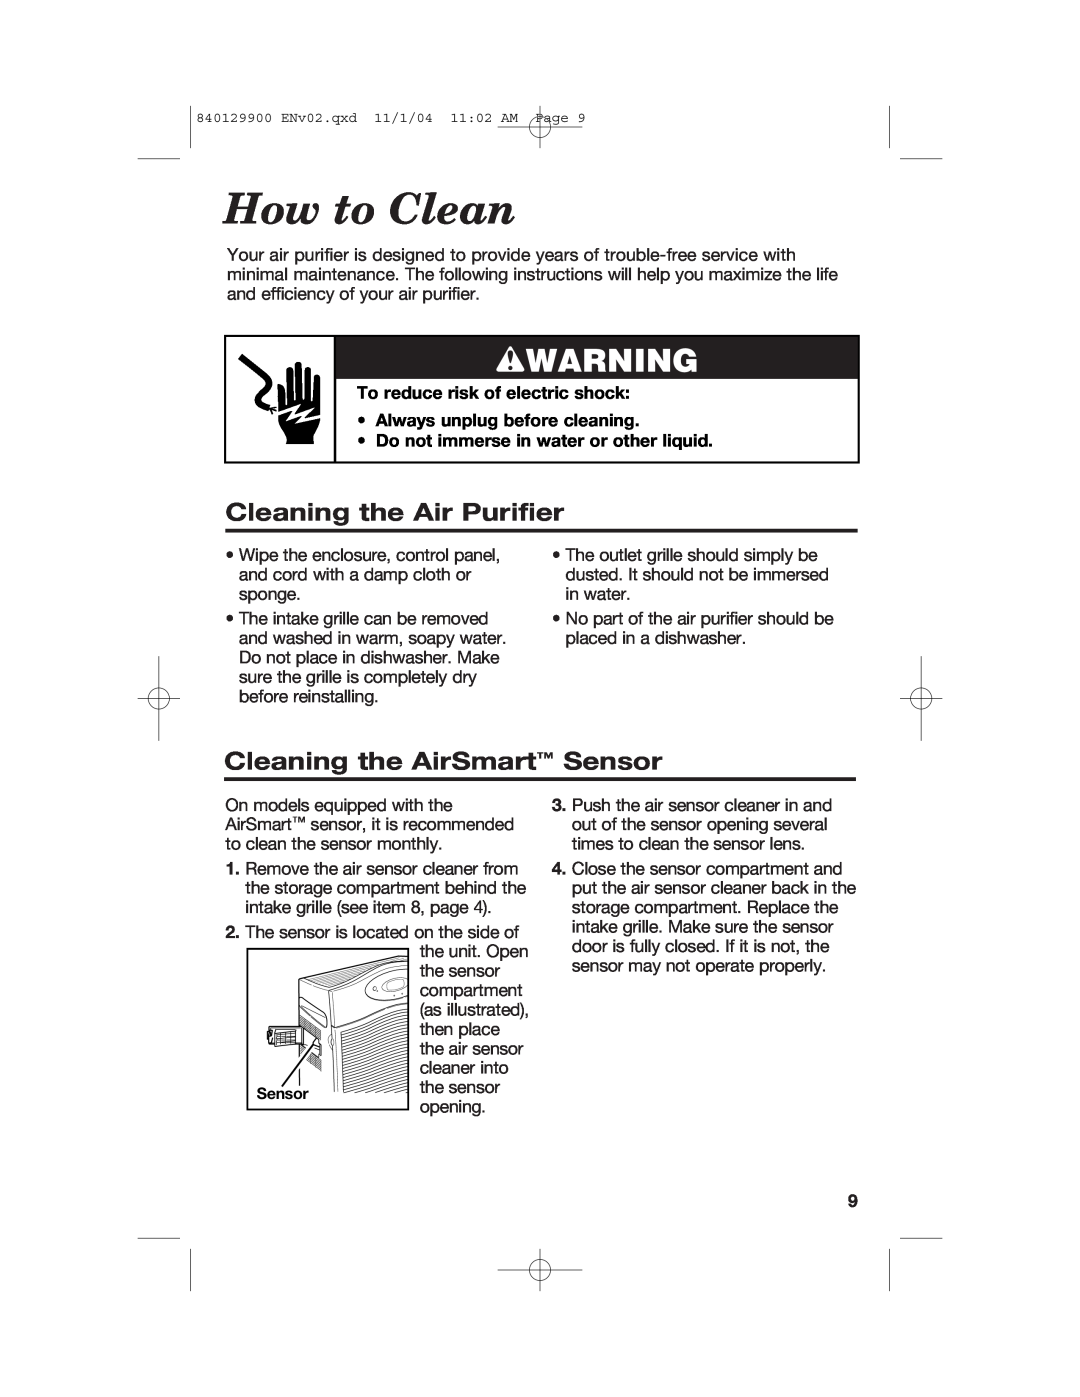 Hamilton Beach 04162, 04160, 04161 manual How to Clean, Cleaning the Air Purifier, Cleaning the AirSmart Sensor, wWARNING 